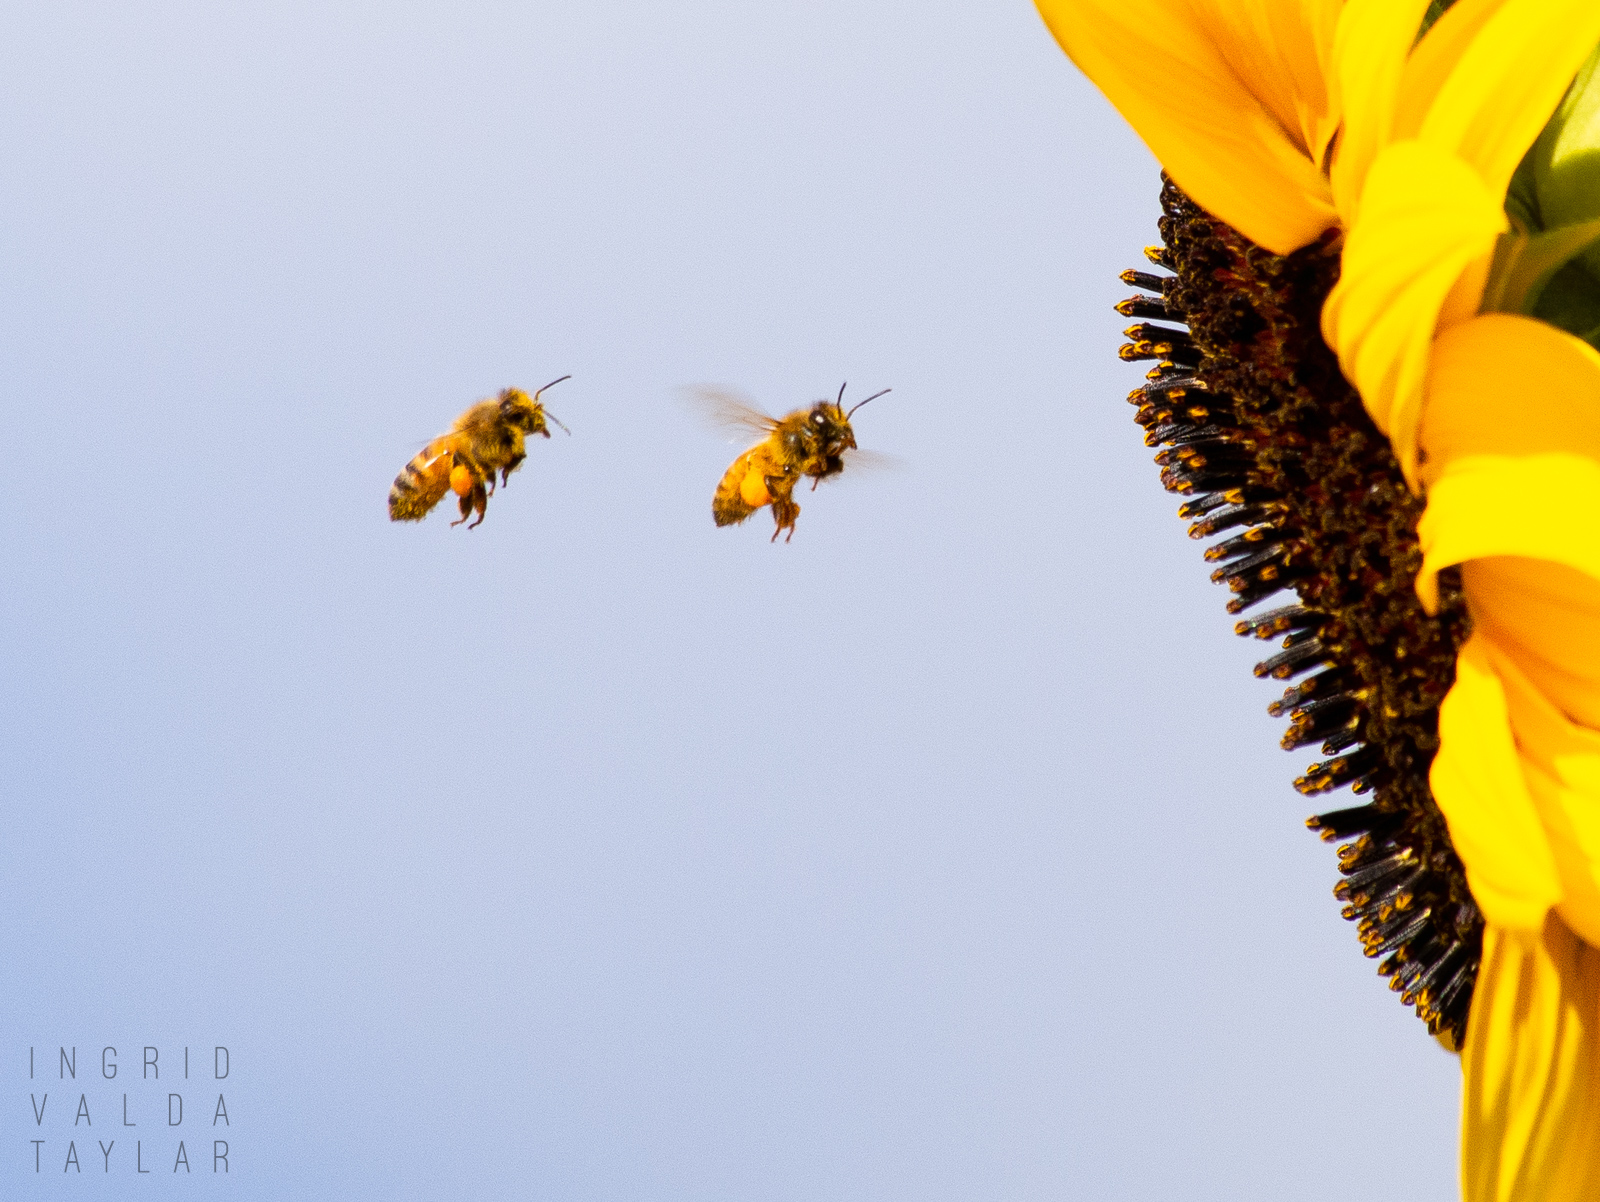 Bees Returning to the Mother Ship